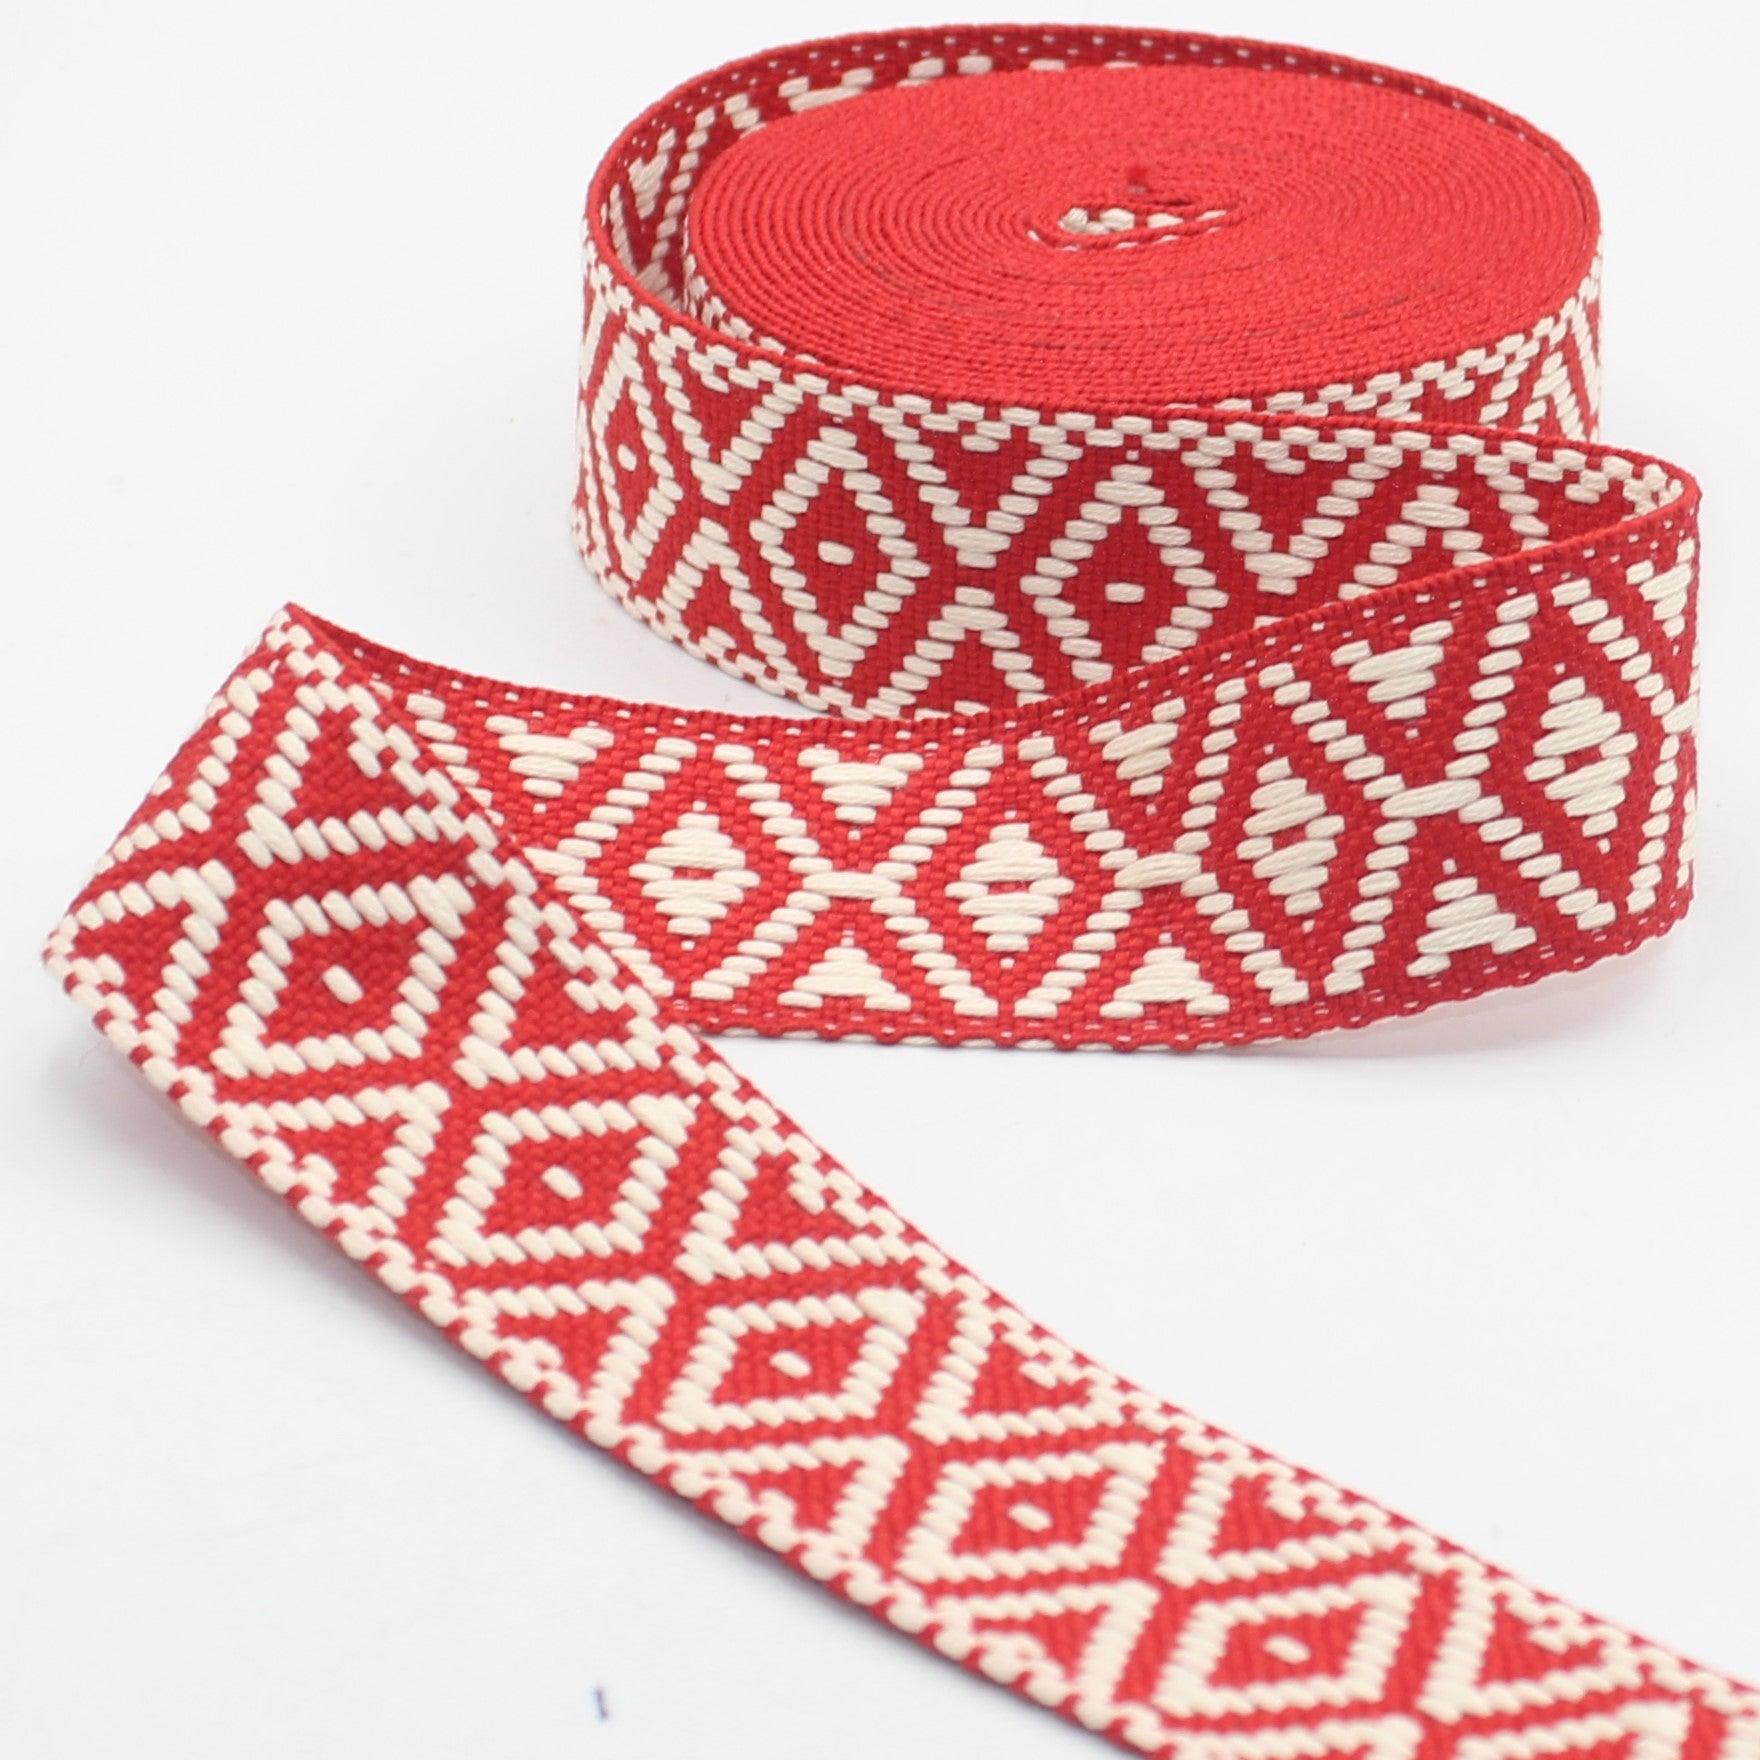 5 meters of Ethnic Strap with diamond-shaped patterns, 40mm #RUB3562 - ACCESSOIRES LEDUC BV